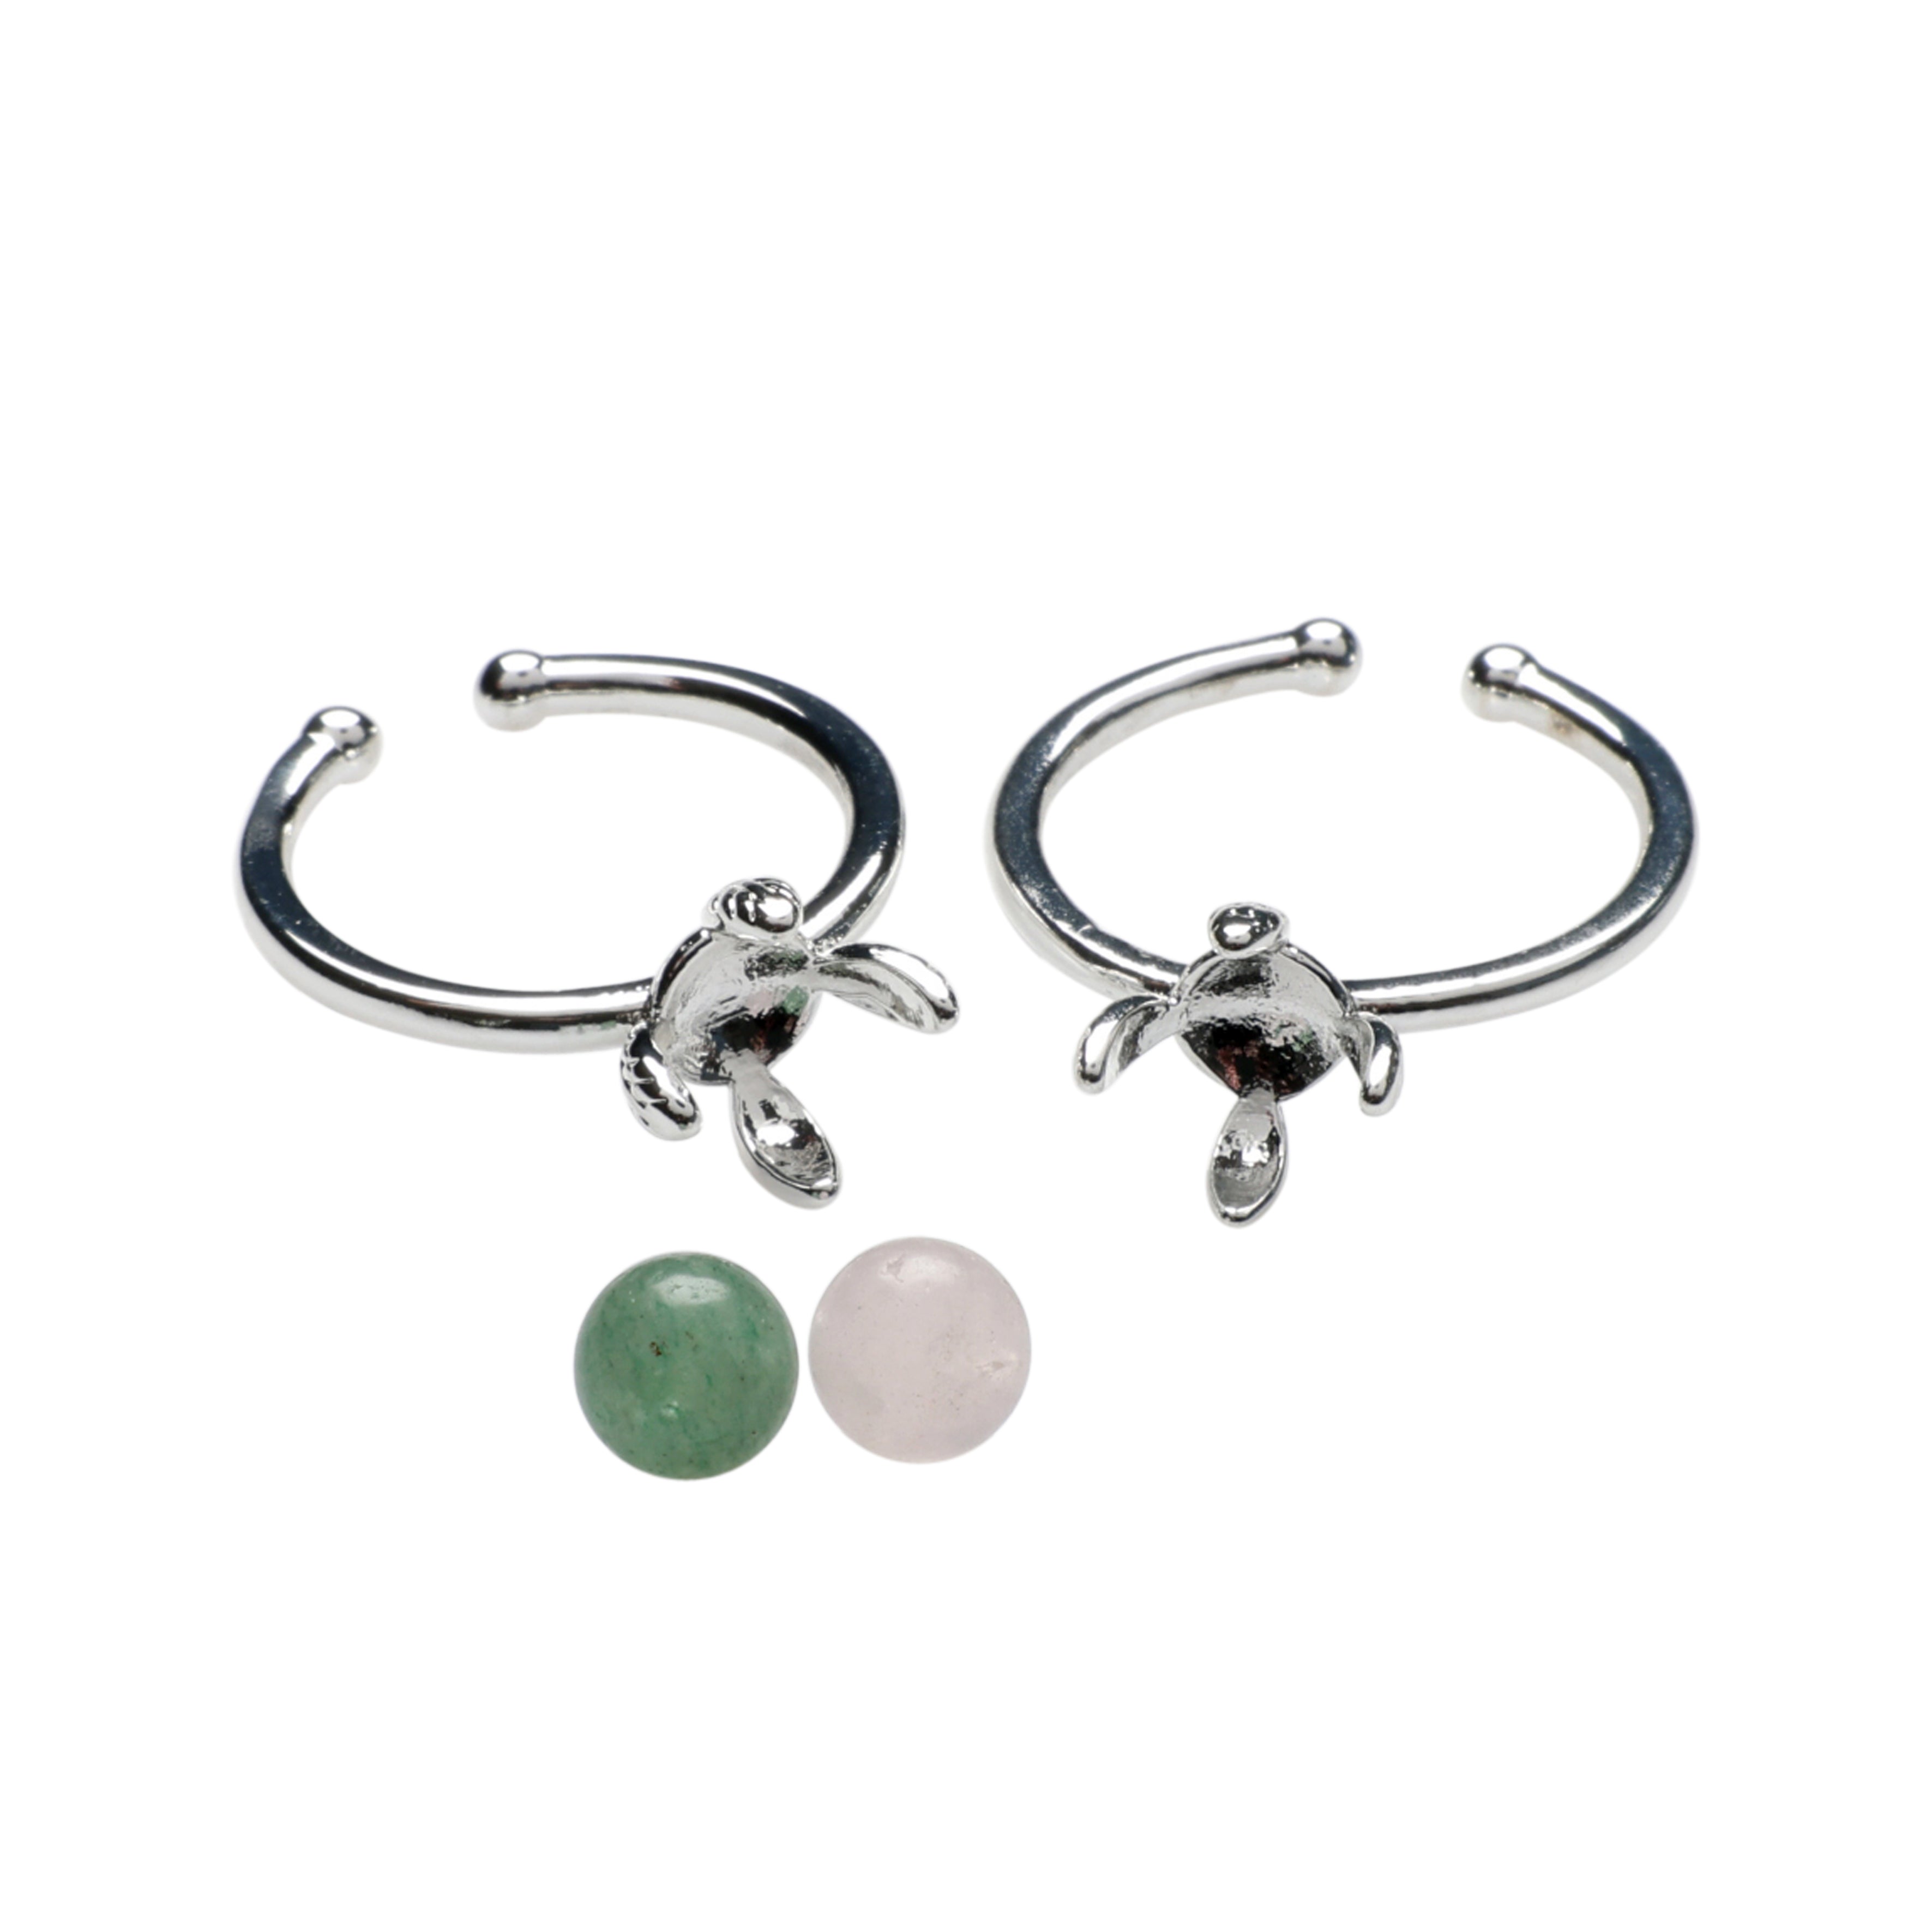 Finger Ring, 925S Sterling Silver Plated x 2, Size 52 + 56 + 1 pc. Aventurine and 1 pc. Rose Quartz